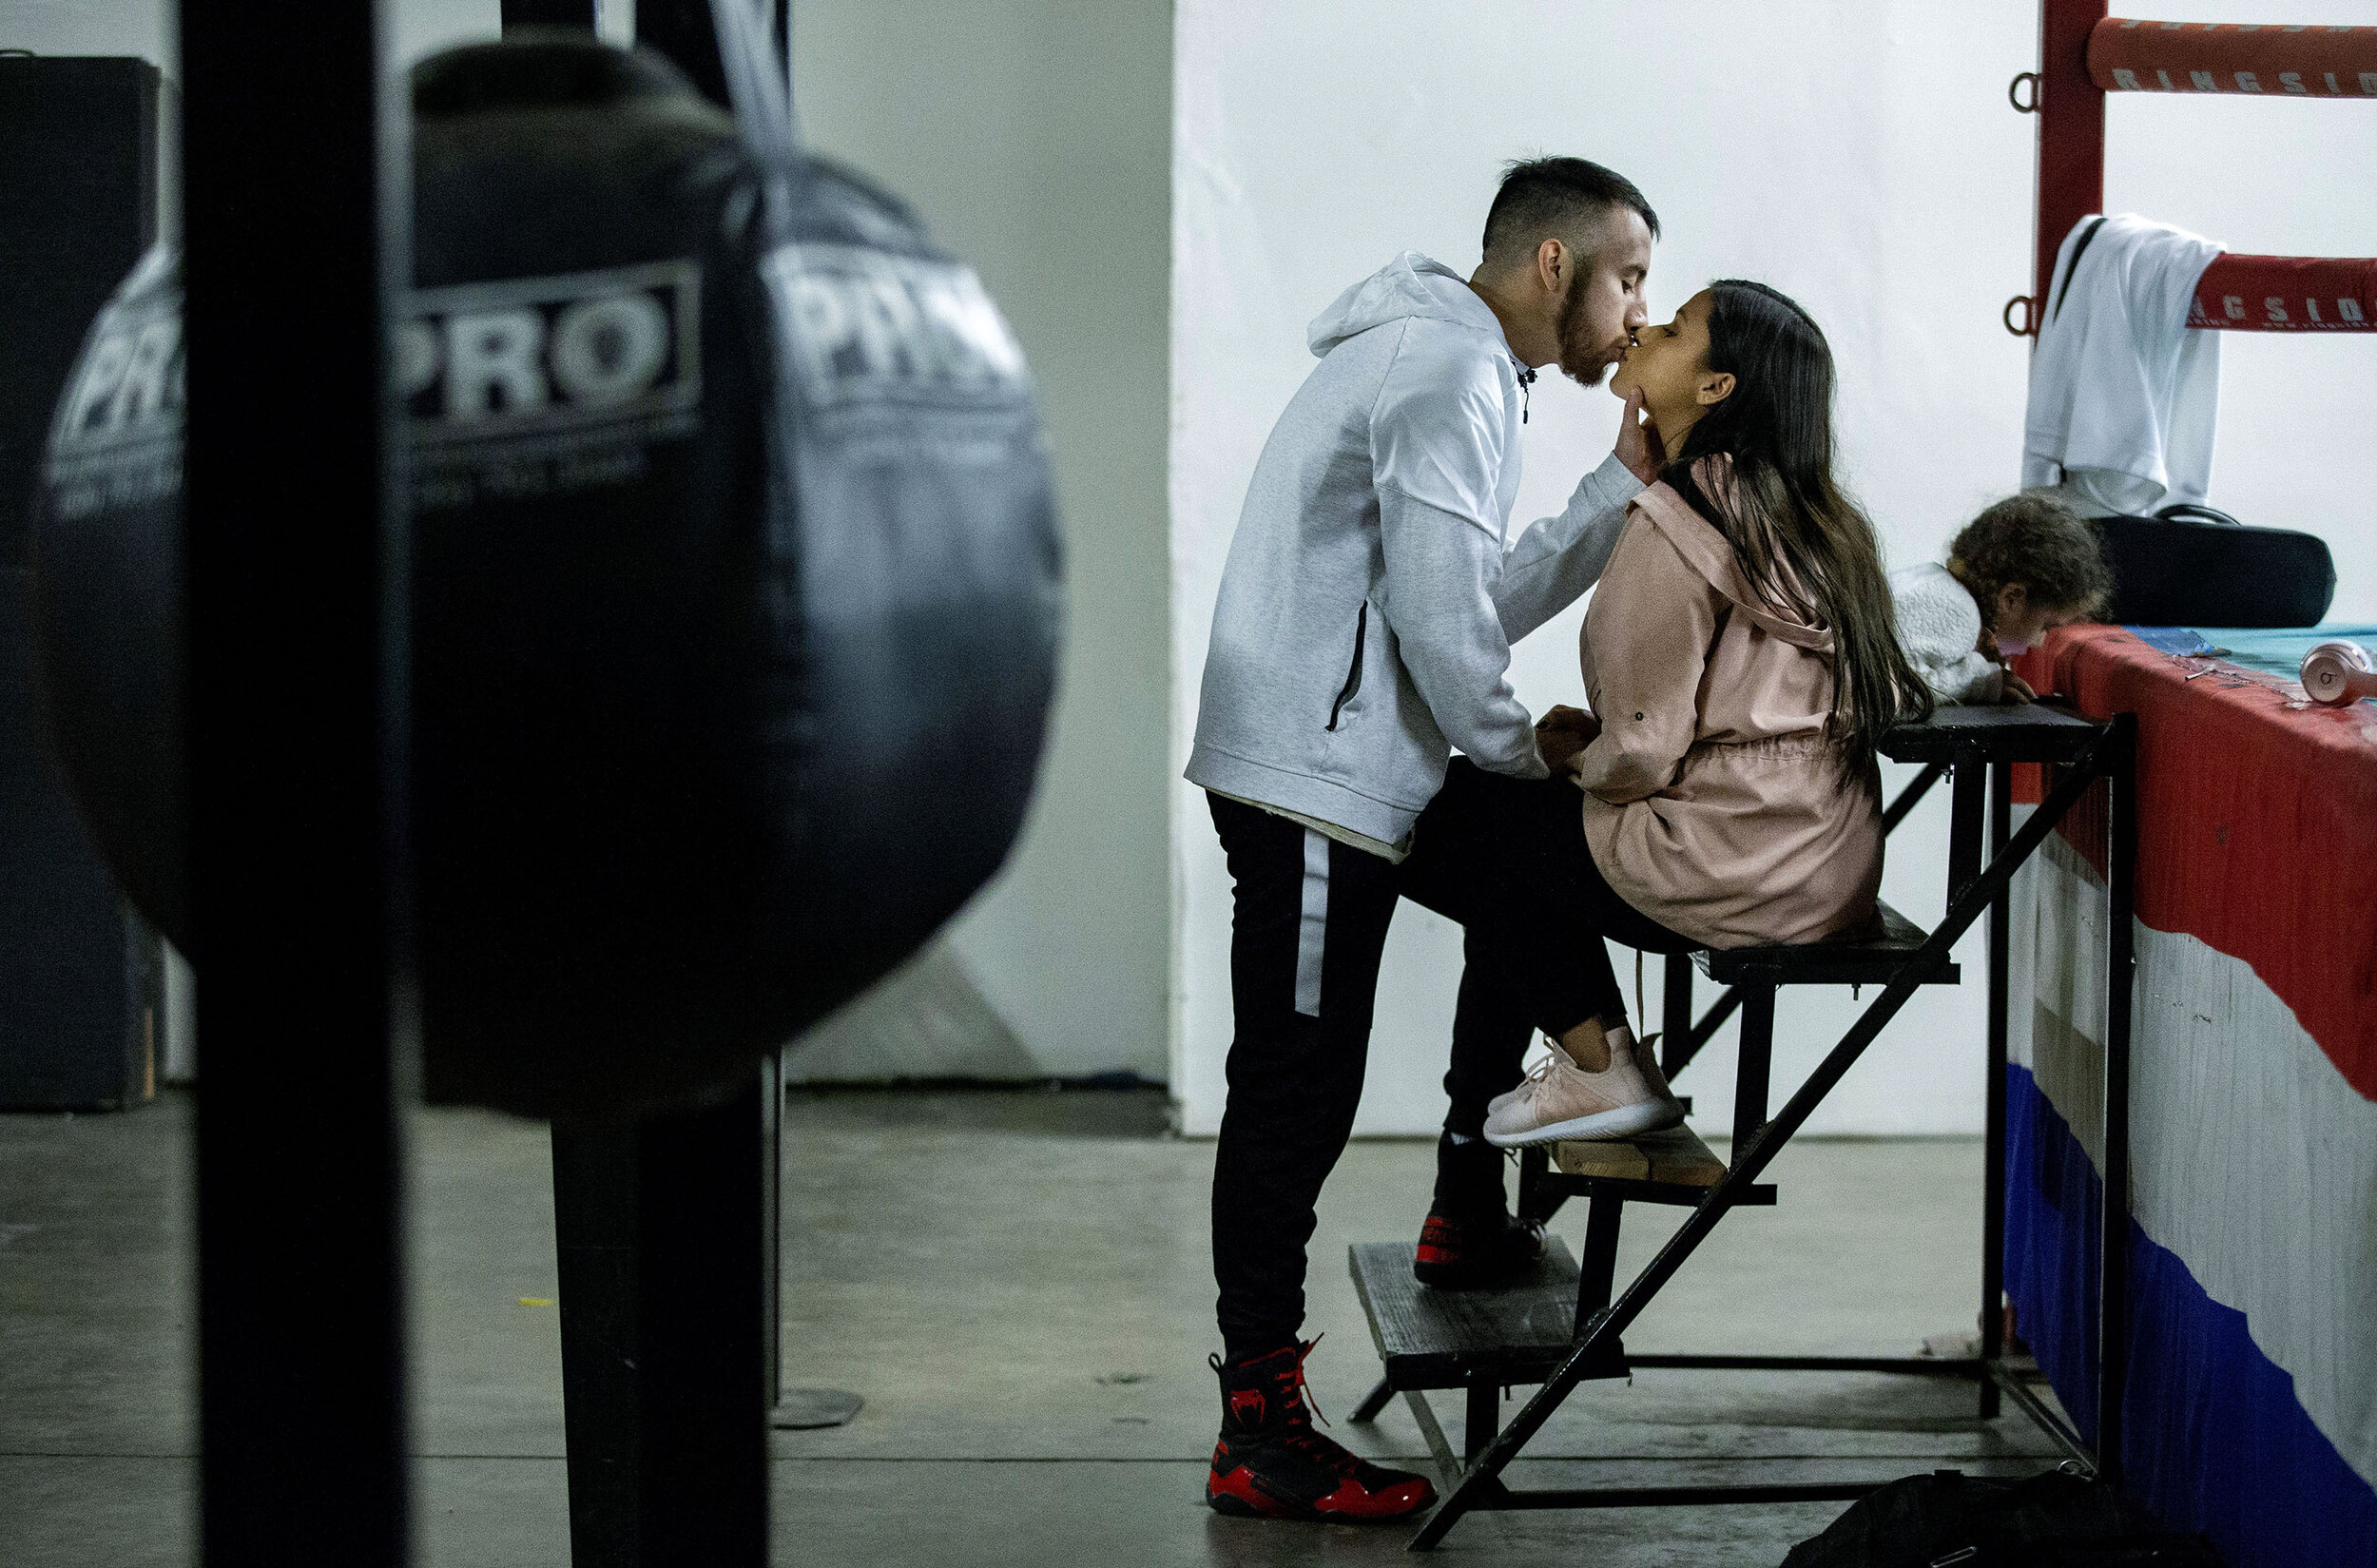  Boxer Carlos Saucedo, 23, of Fontana spends some quite time with girlfriend Crystal Munoz, 21, at M.T.C. Boxing Club four days before the his fight after his nightly workout in San Bernardino on Tuesday, February 12, 2019. PUBLISHED Feb. 21, 2019 